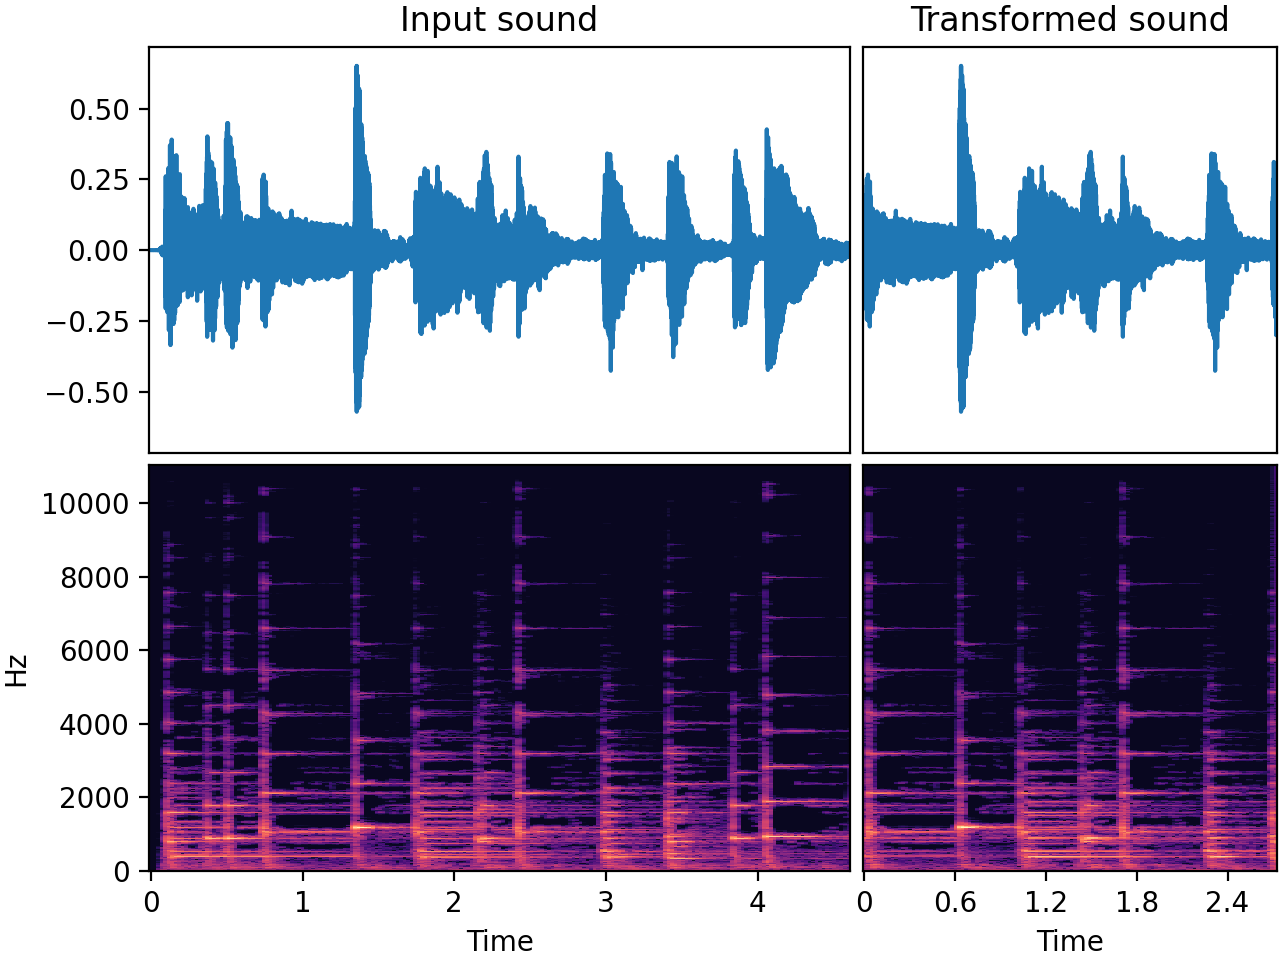 Input-output waveforms and spectrograms